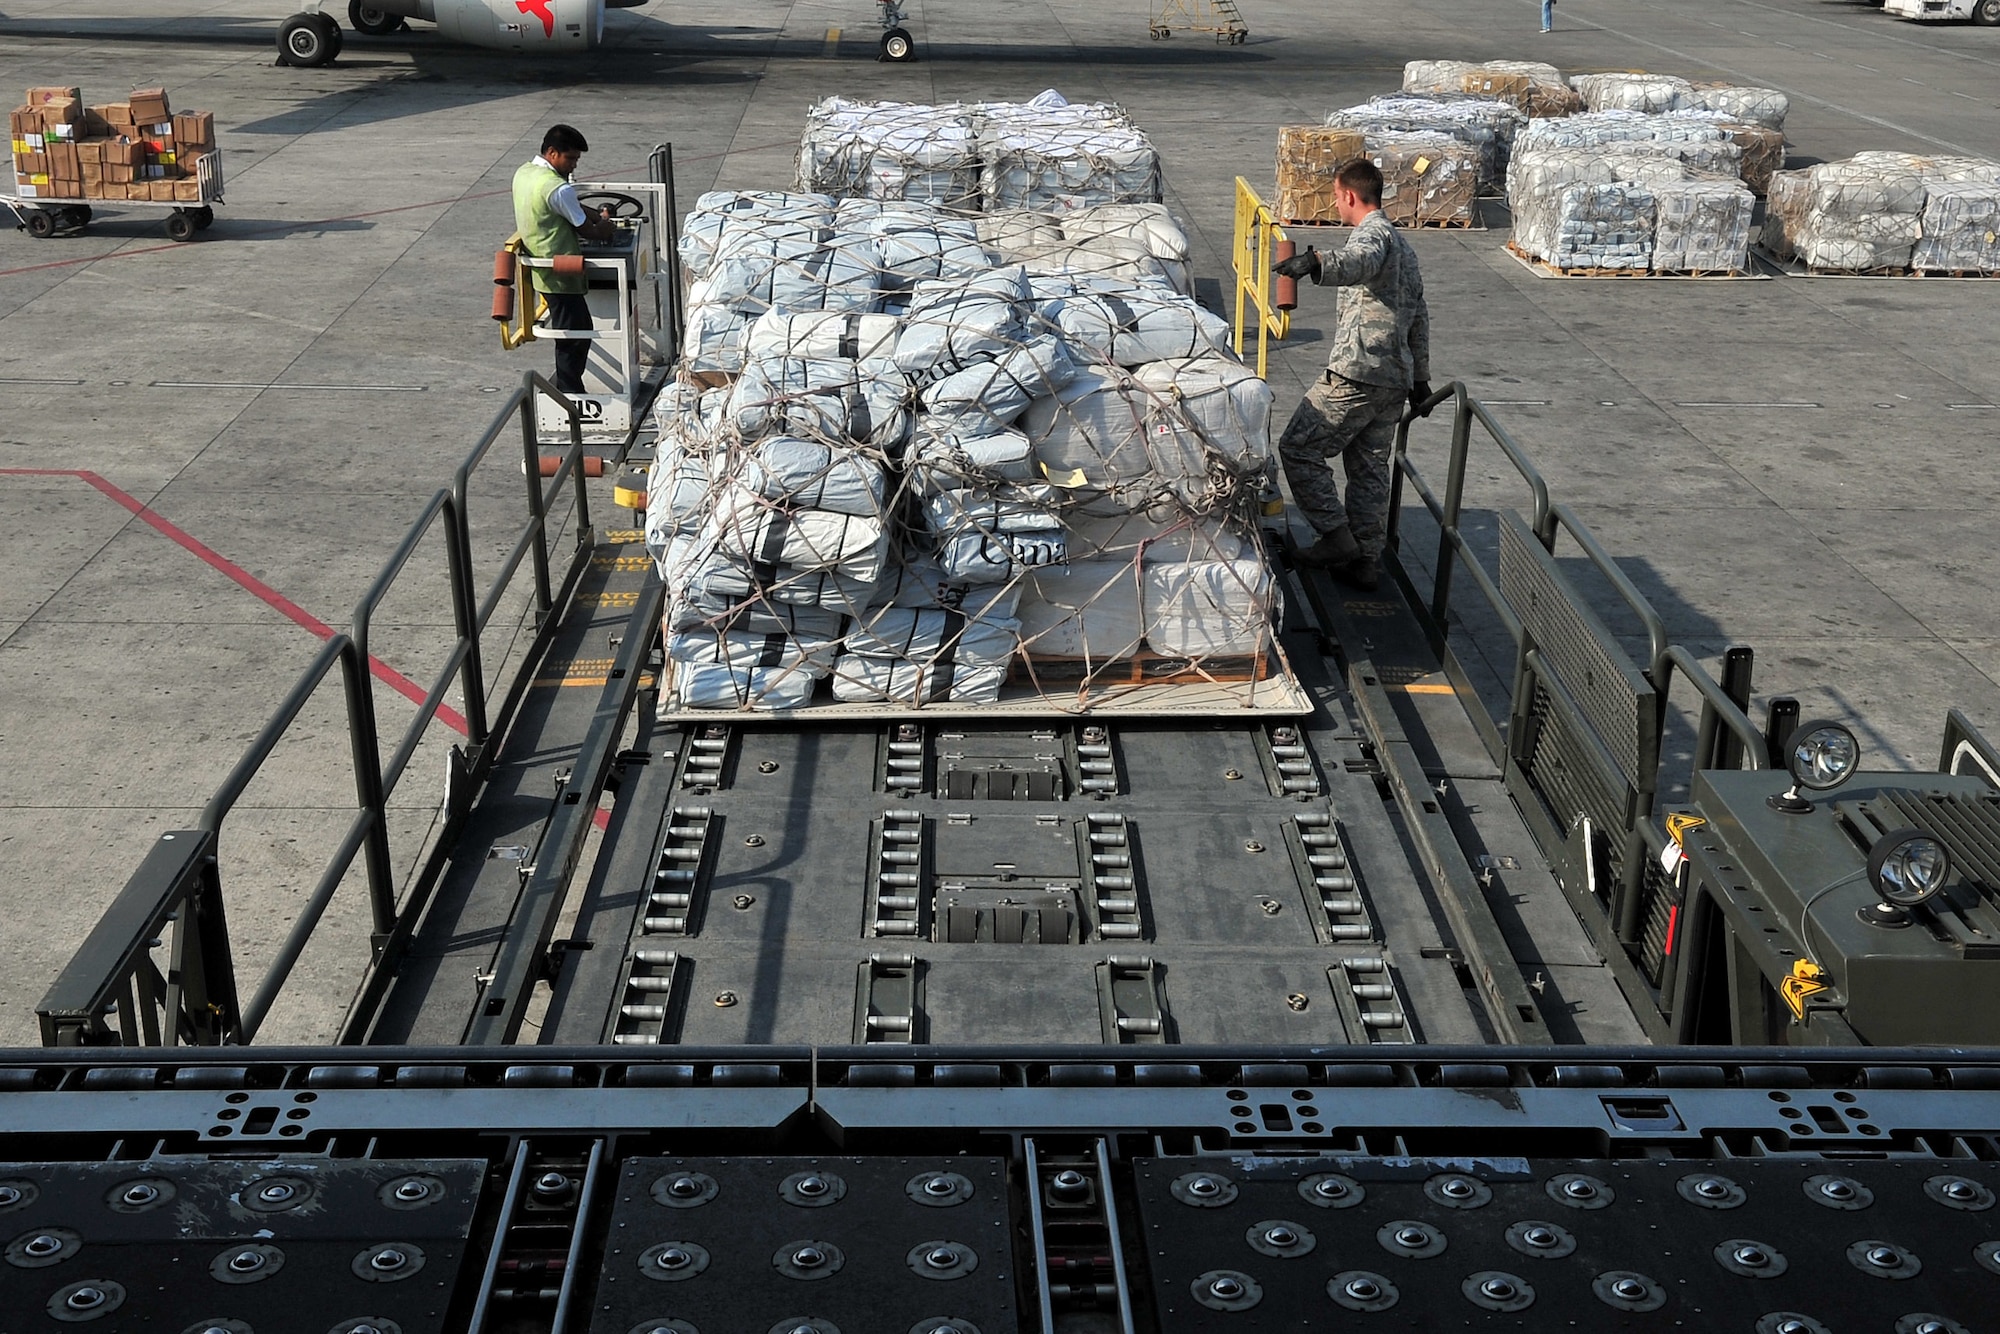 Staff Sgt. Josh Foley, a 36th Mobility Response Squadron aerial port supervisor, and a Nepalese official help unload relief supplies from an MD-11 cargo aircraft at the Tribhuvan International Airport in Kathmandu, Nepal, May 11, 2015. The Nepalese army and Airmen worked together to process 509,380 pounds of cargo in a 24-hour period from nine aircraft delivering relief supplies after a 7.8-magnitude earthquake struck the nation April 25. (U.S. Air Force photo/Staff Sgt. Melissa B. White)